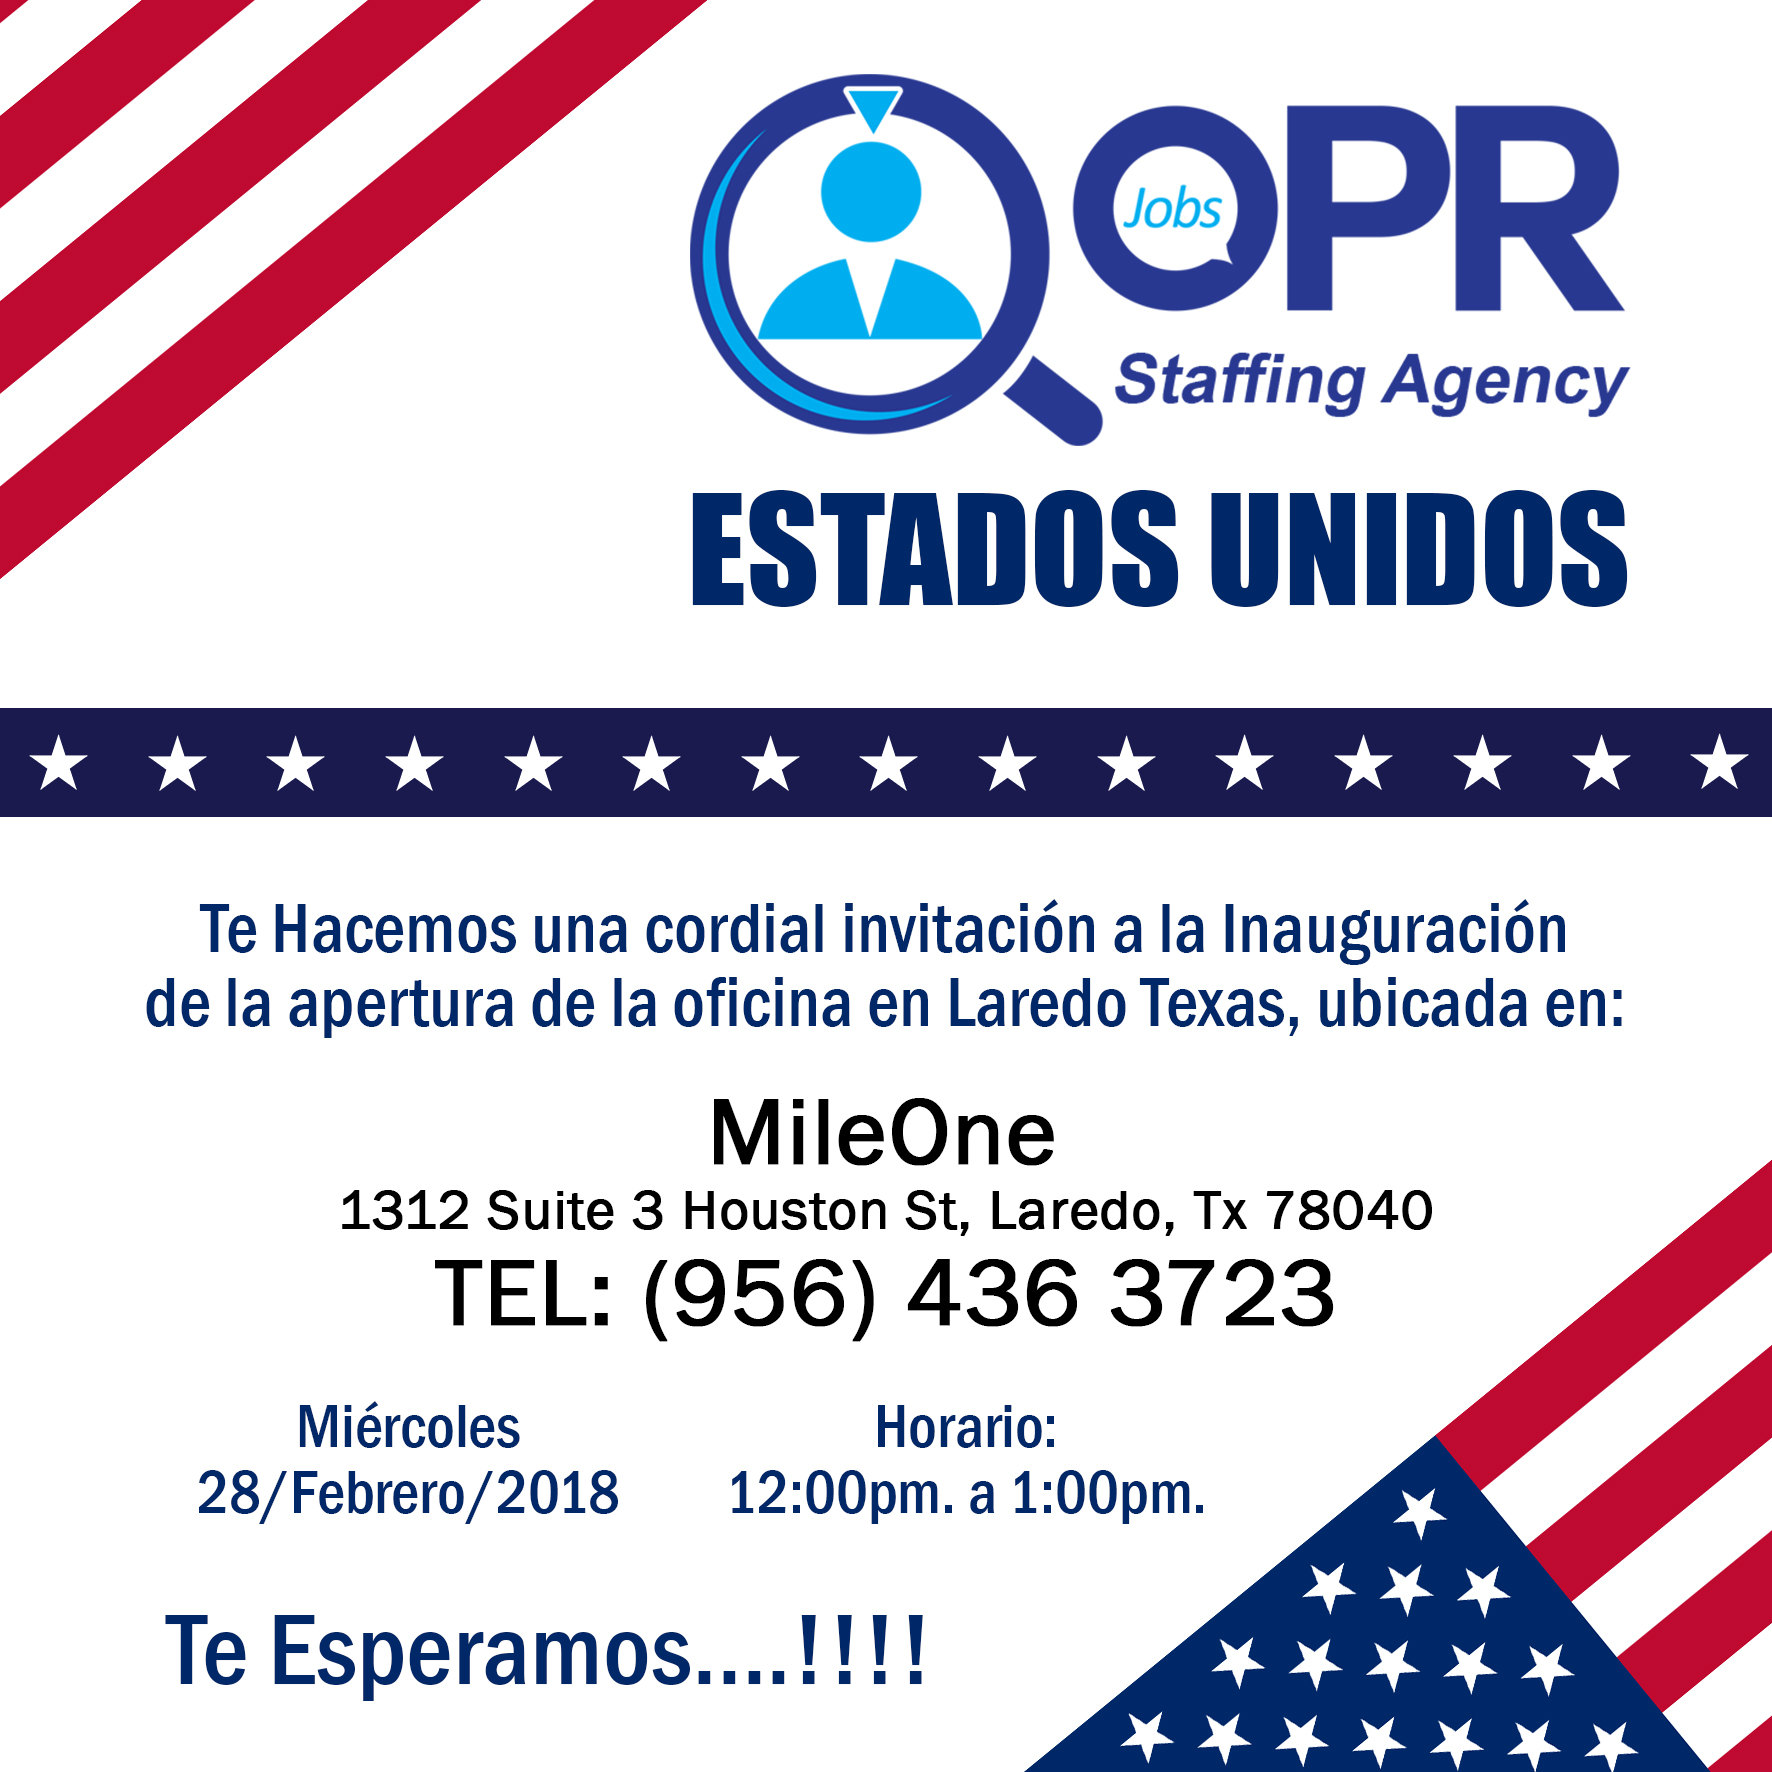 OPR Jobs Staffing Agency - Grand Opening